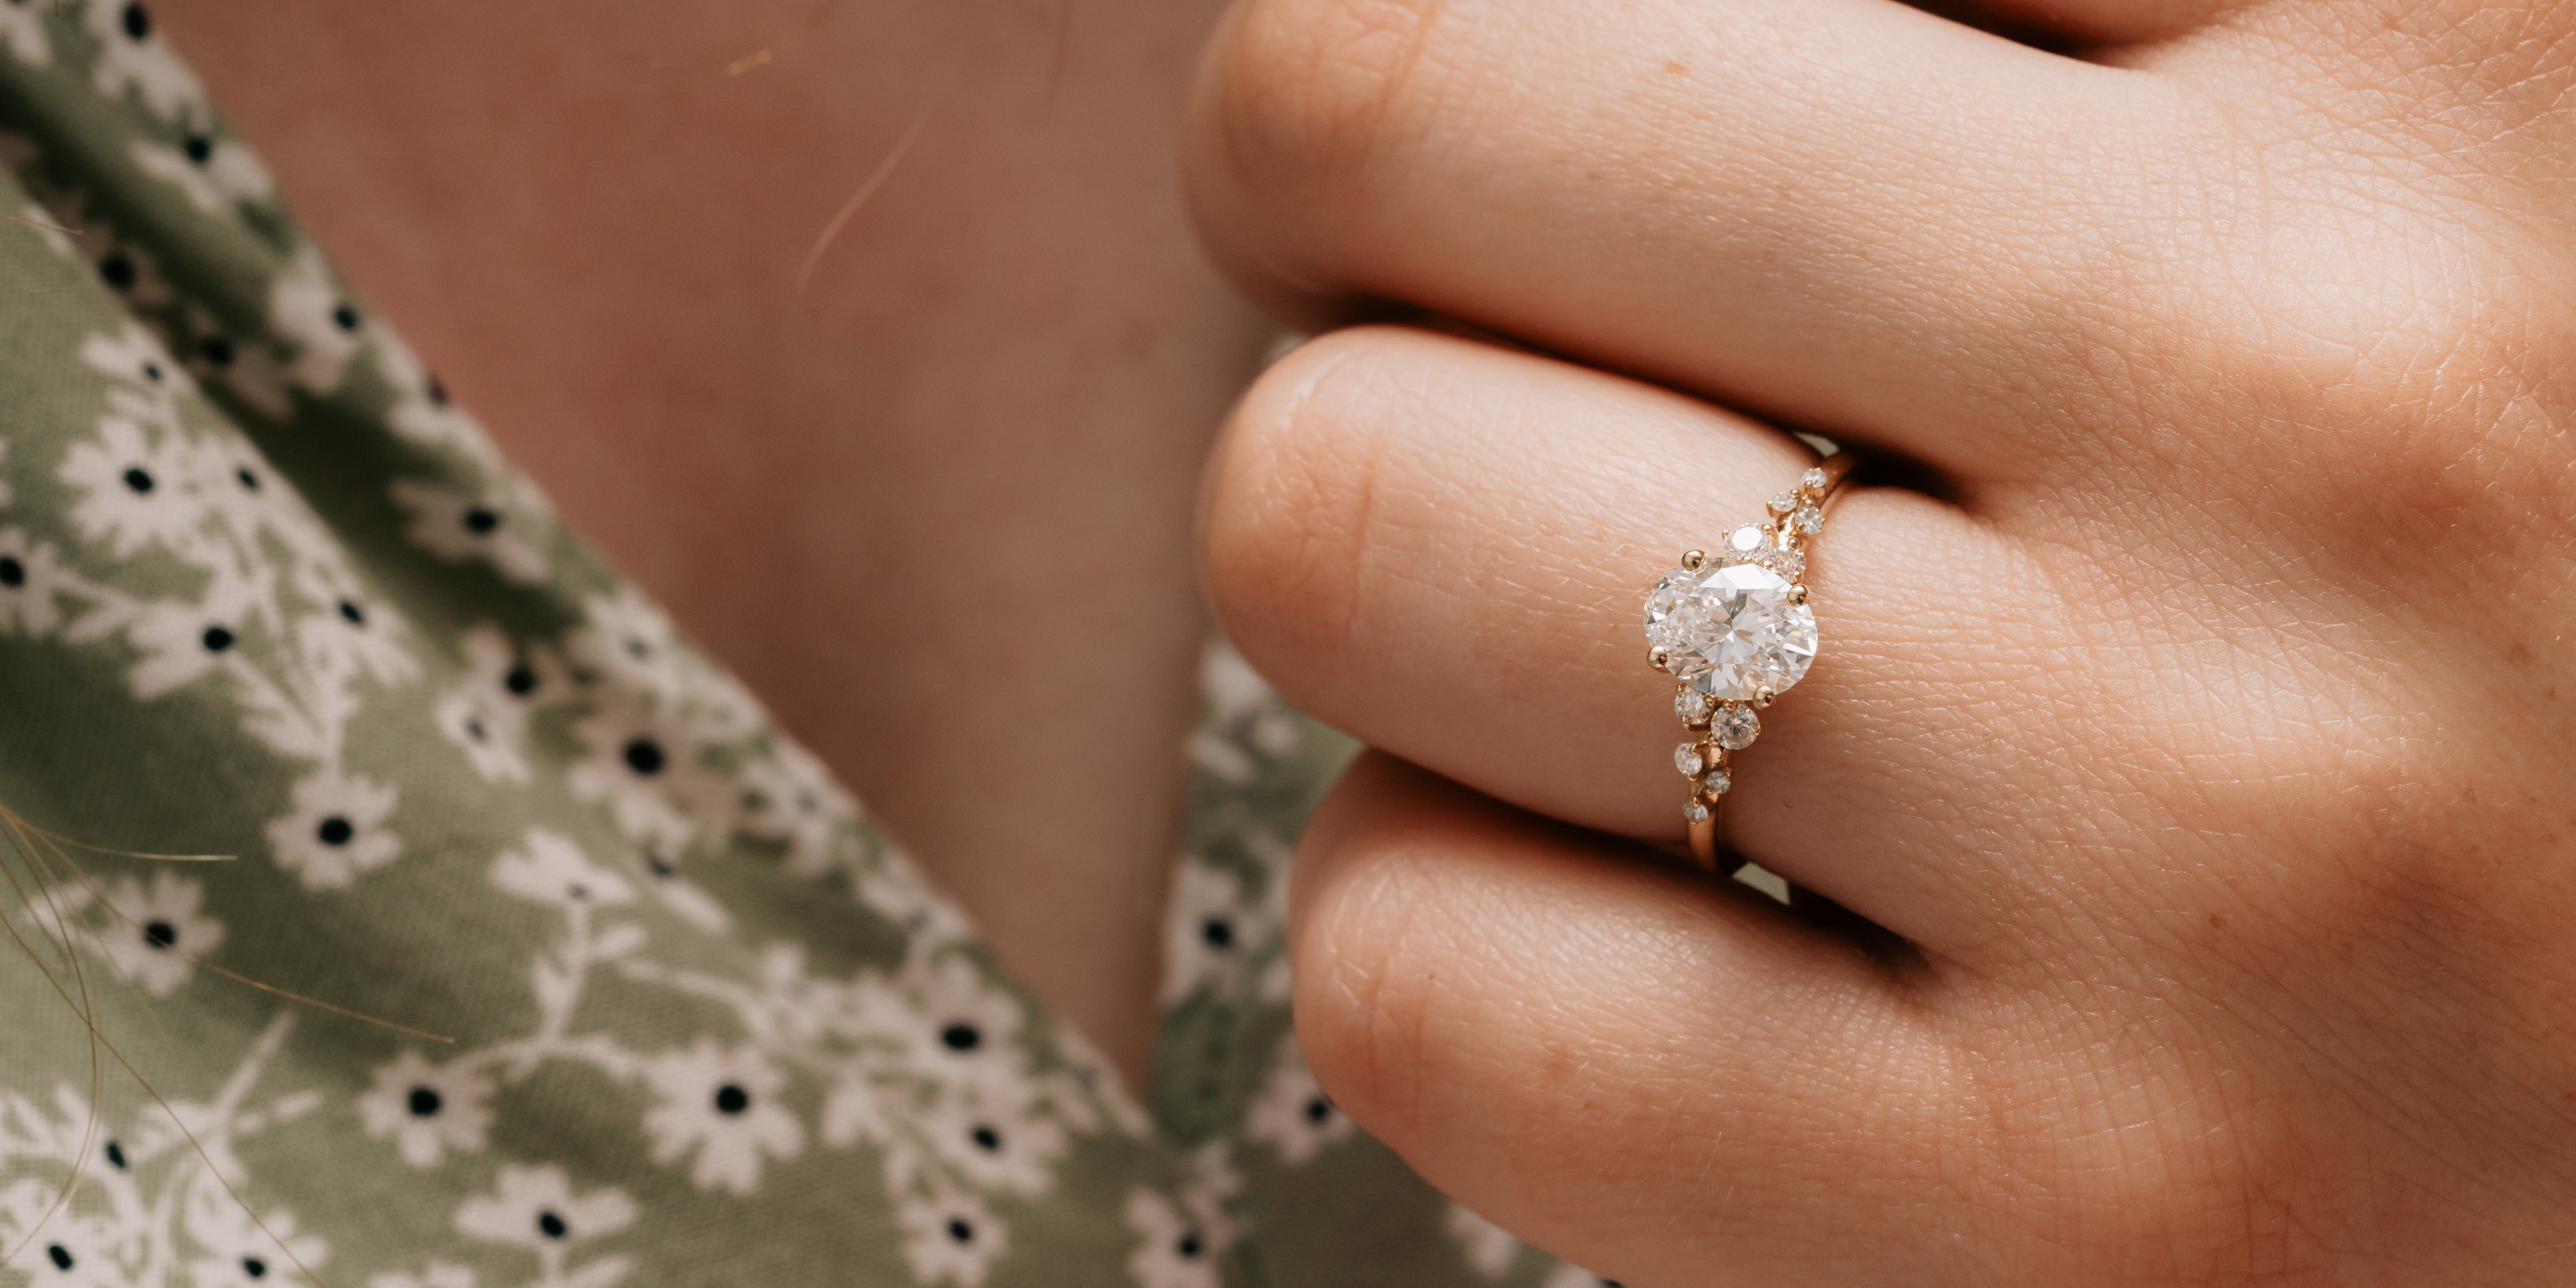 How To Choose Perfect Promise Ring Within Your Budget - GBJ